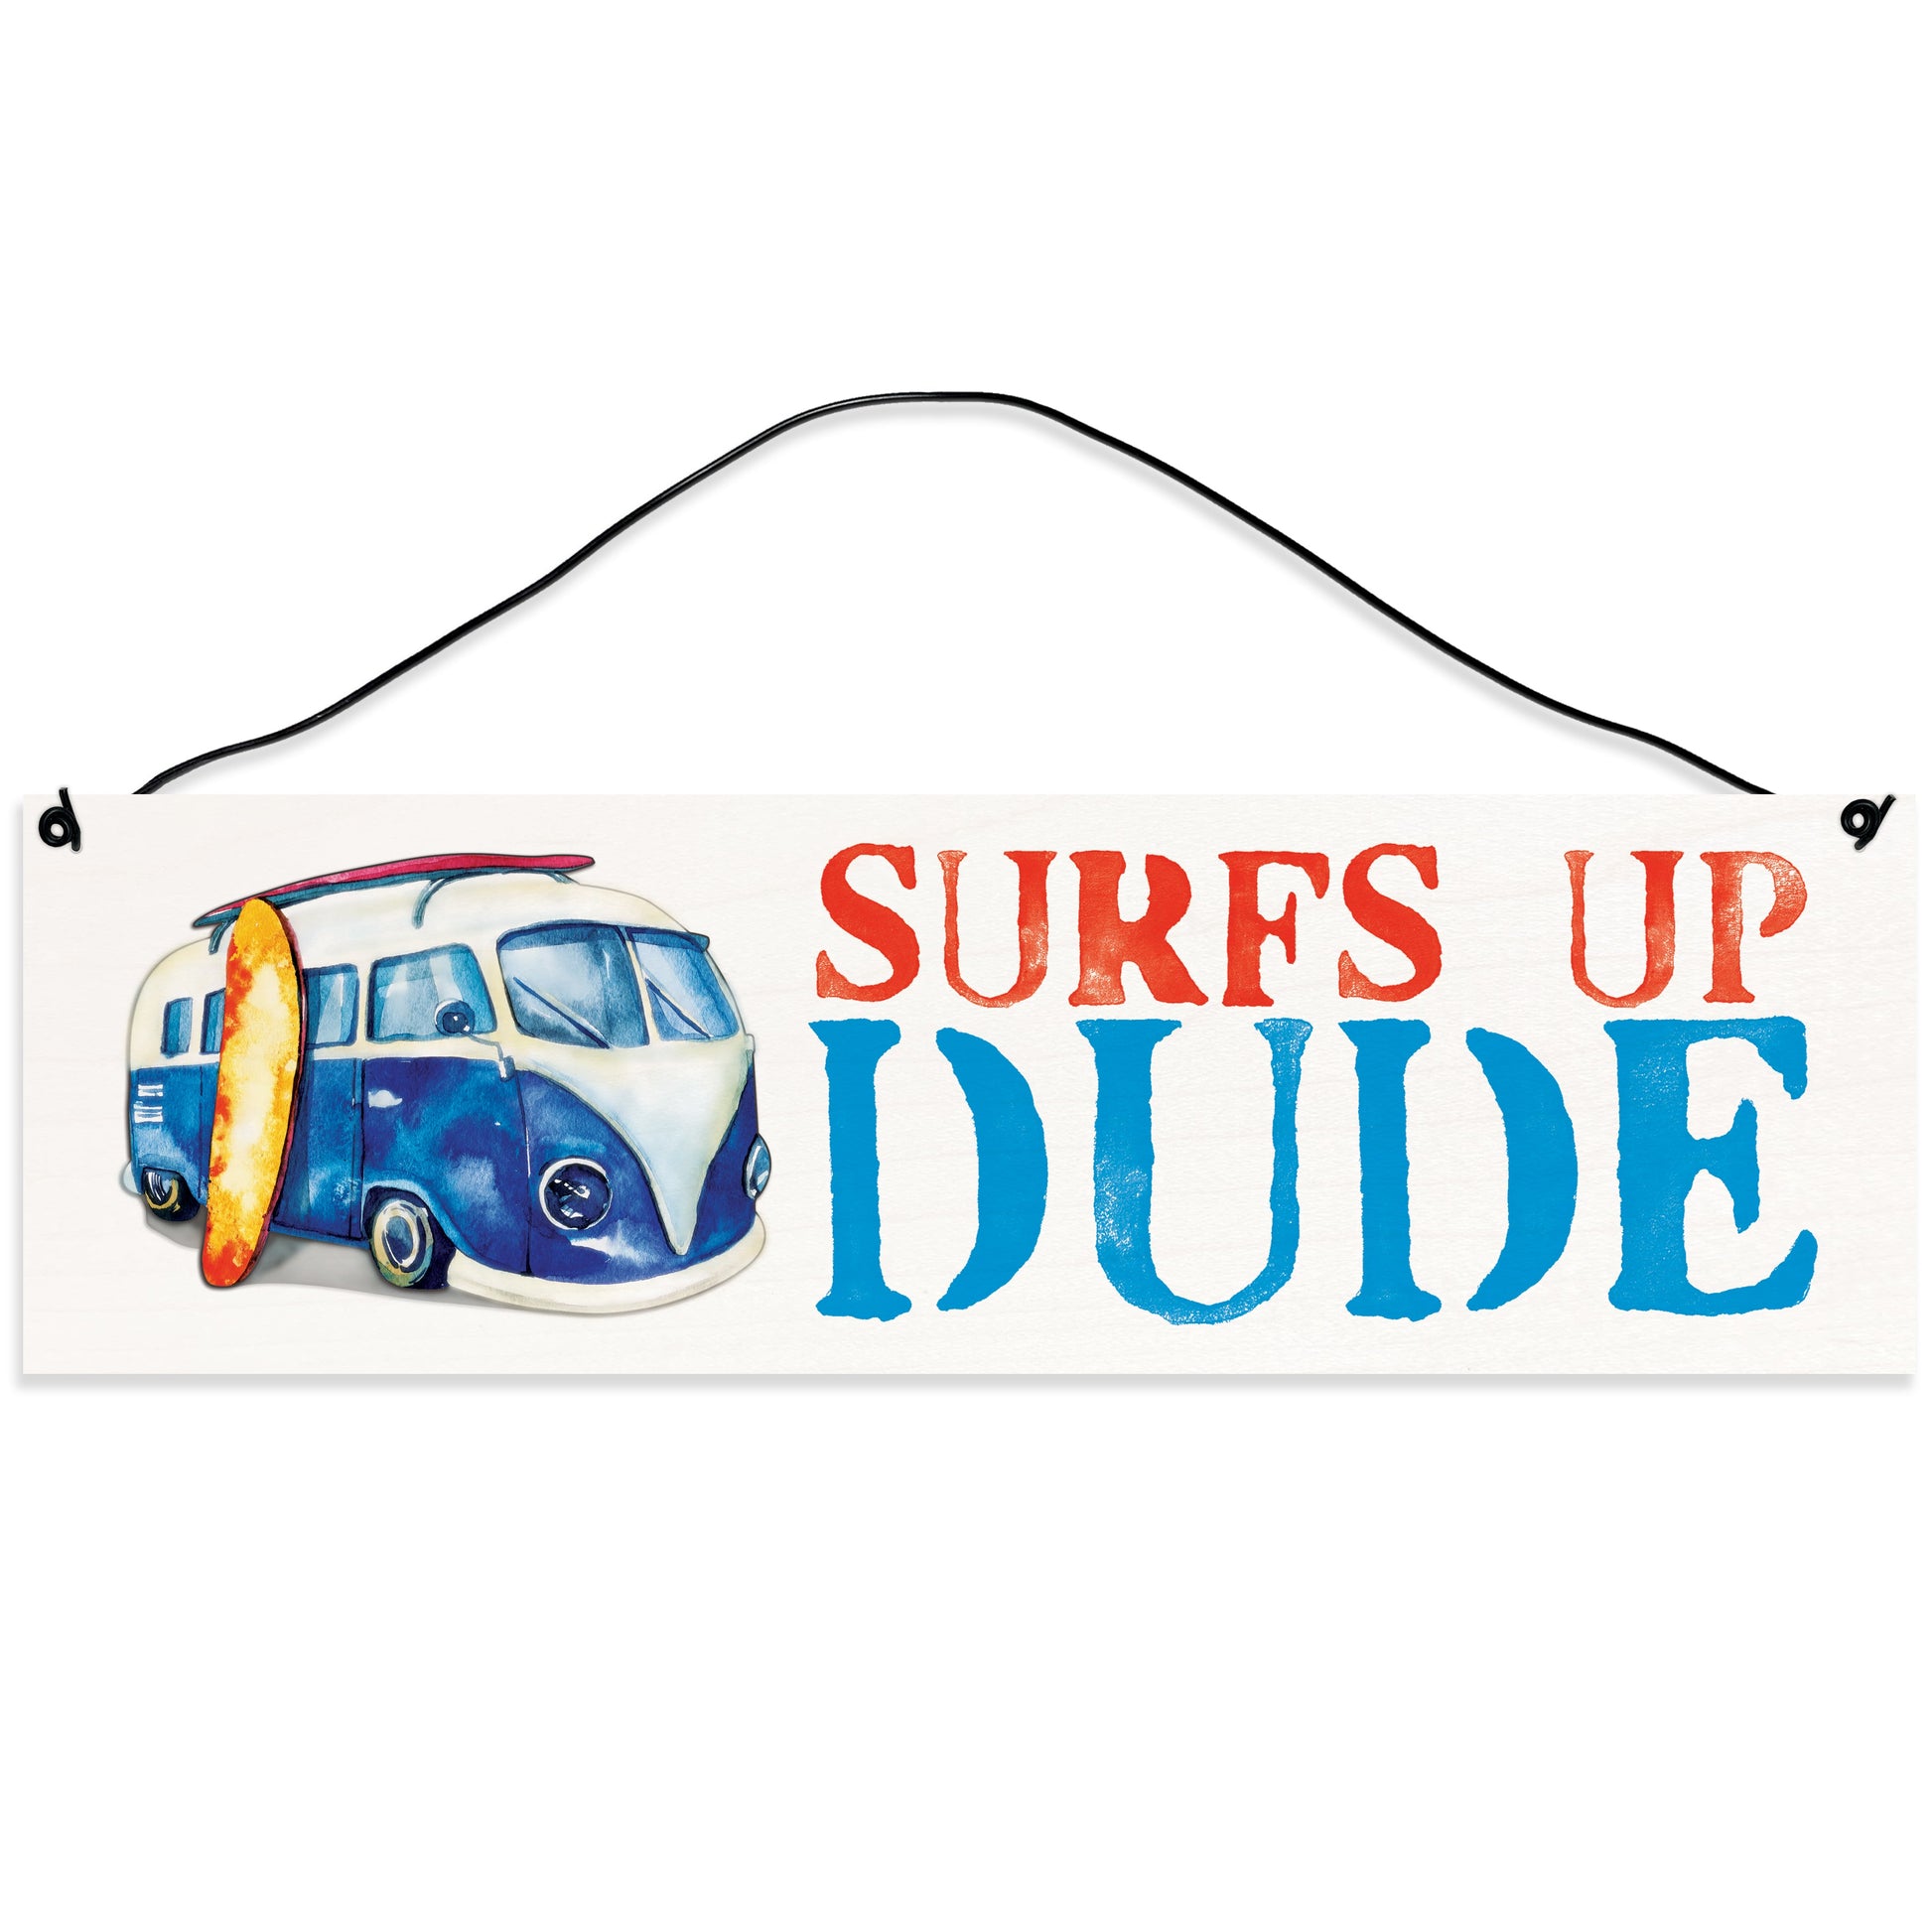 Sawyer's Mill - Surfs Up Dude. Wood Sign for Home or Office. Measures 3x10 inches.